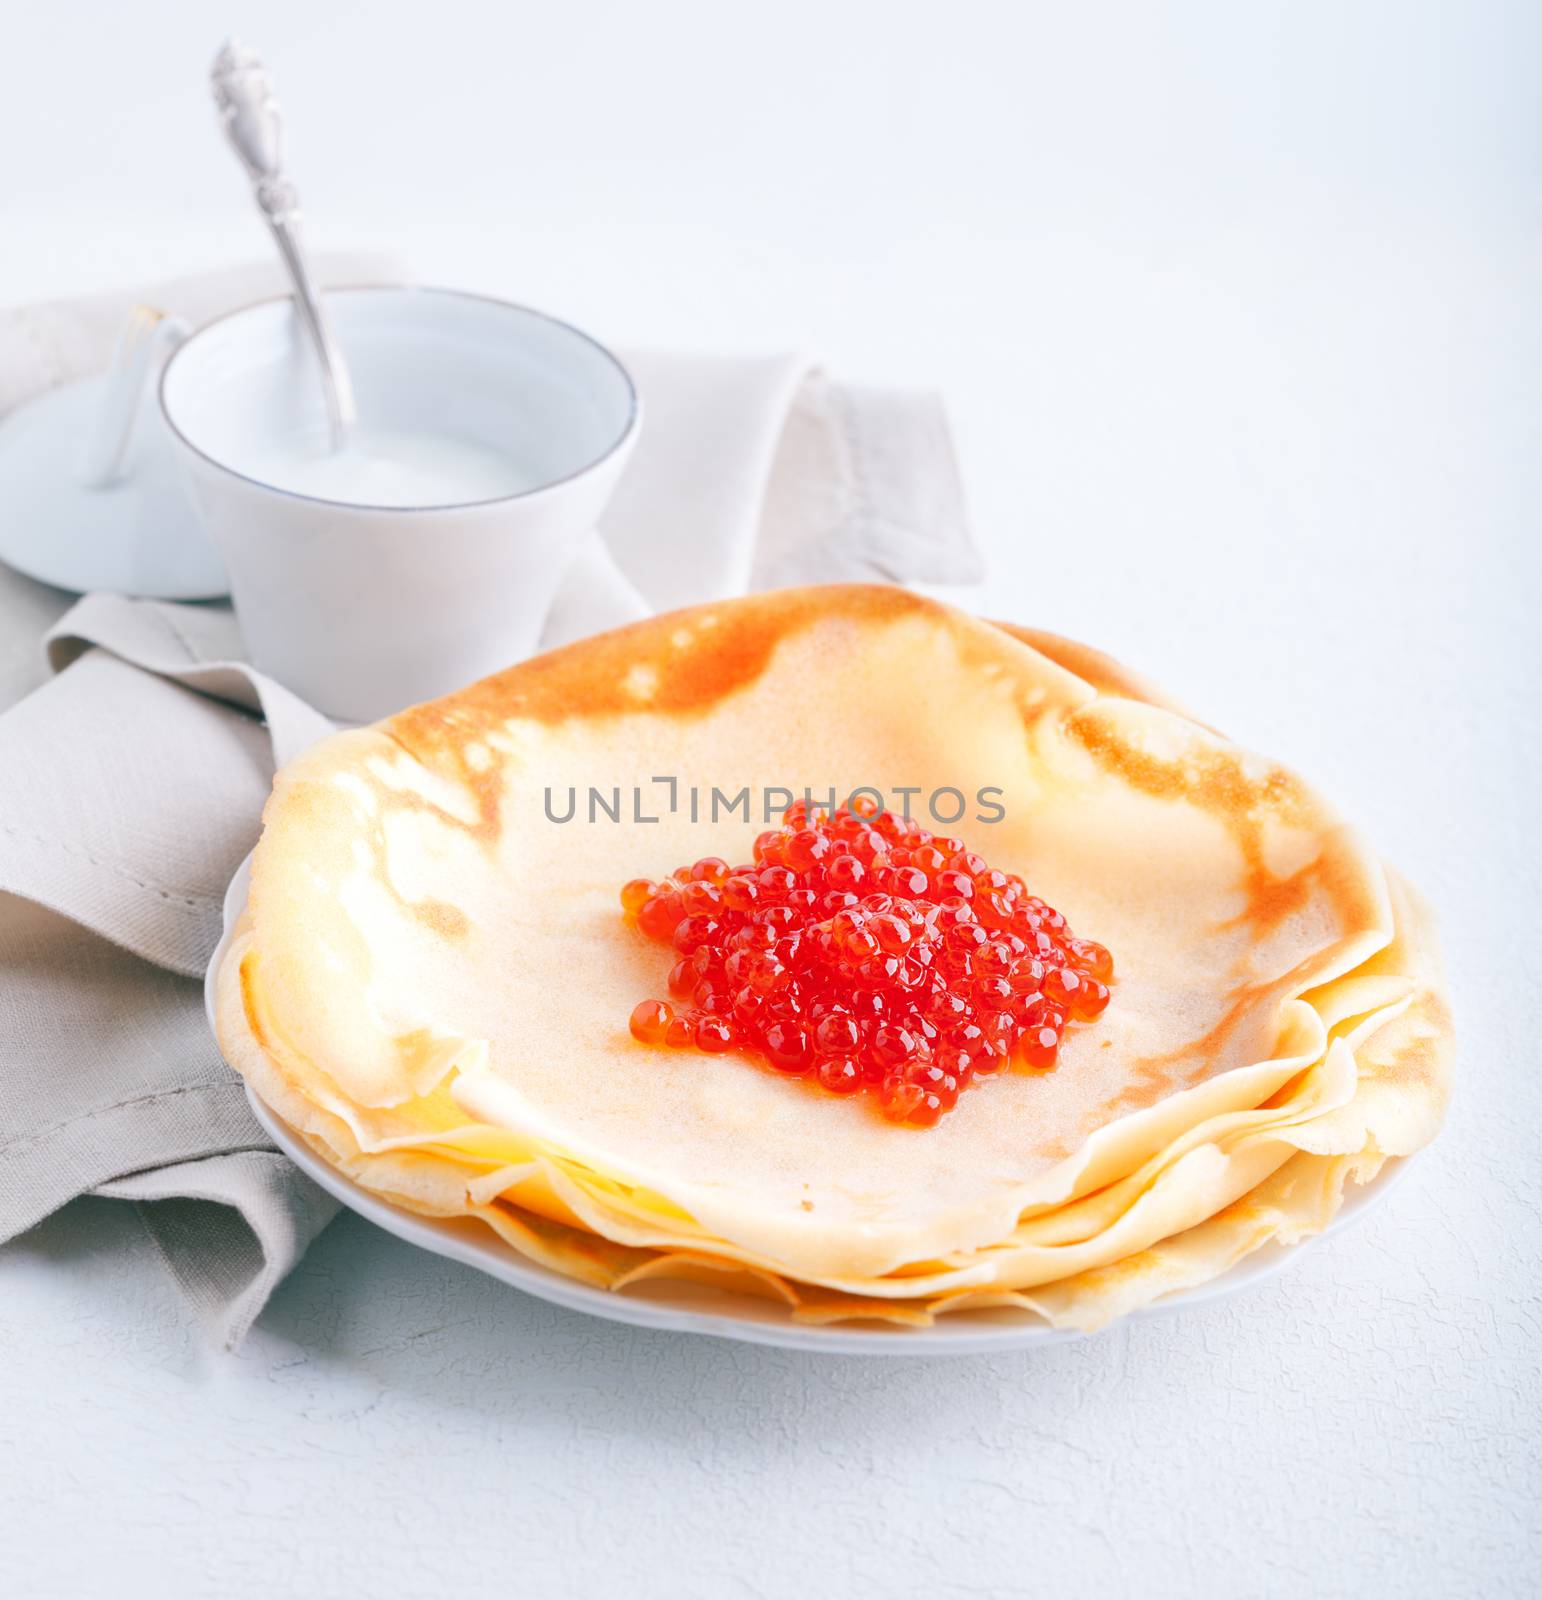 Crispy crepes with salmon caviar and butter cream.
Gluten free. Flour from rice.